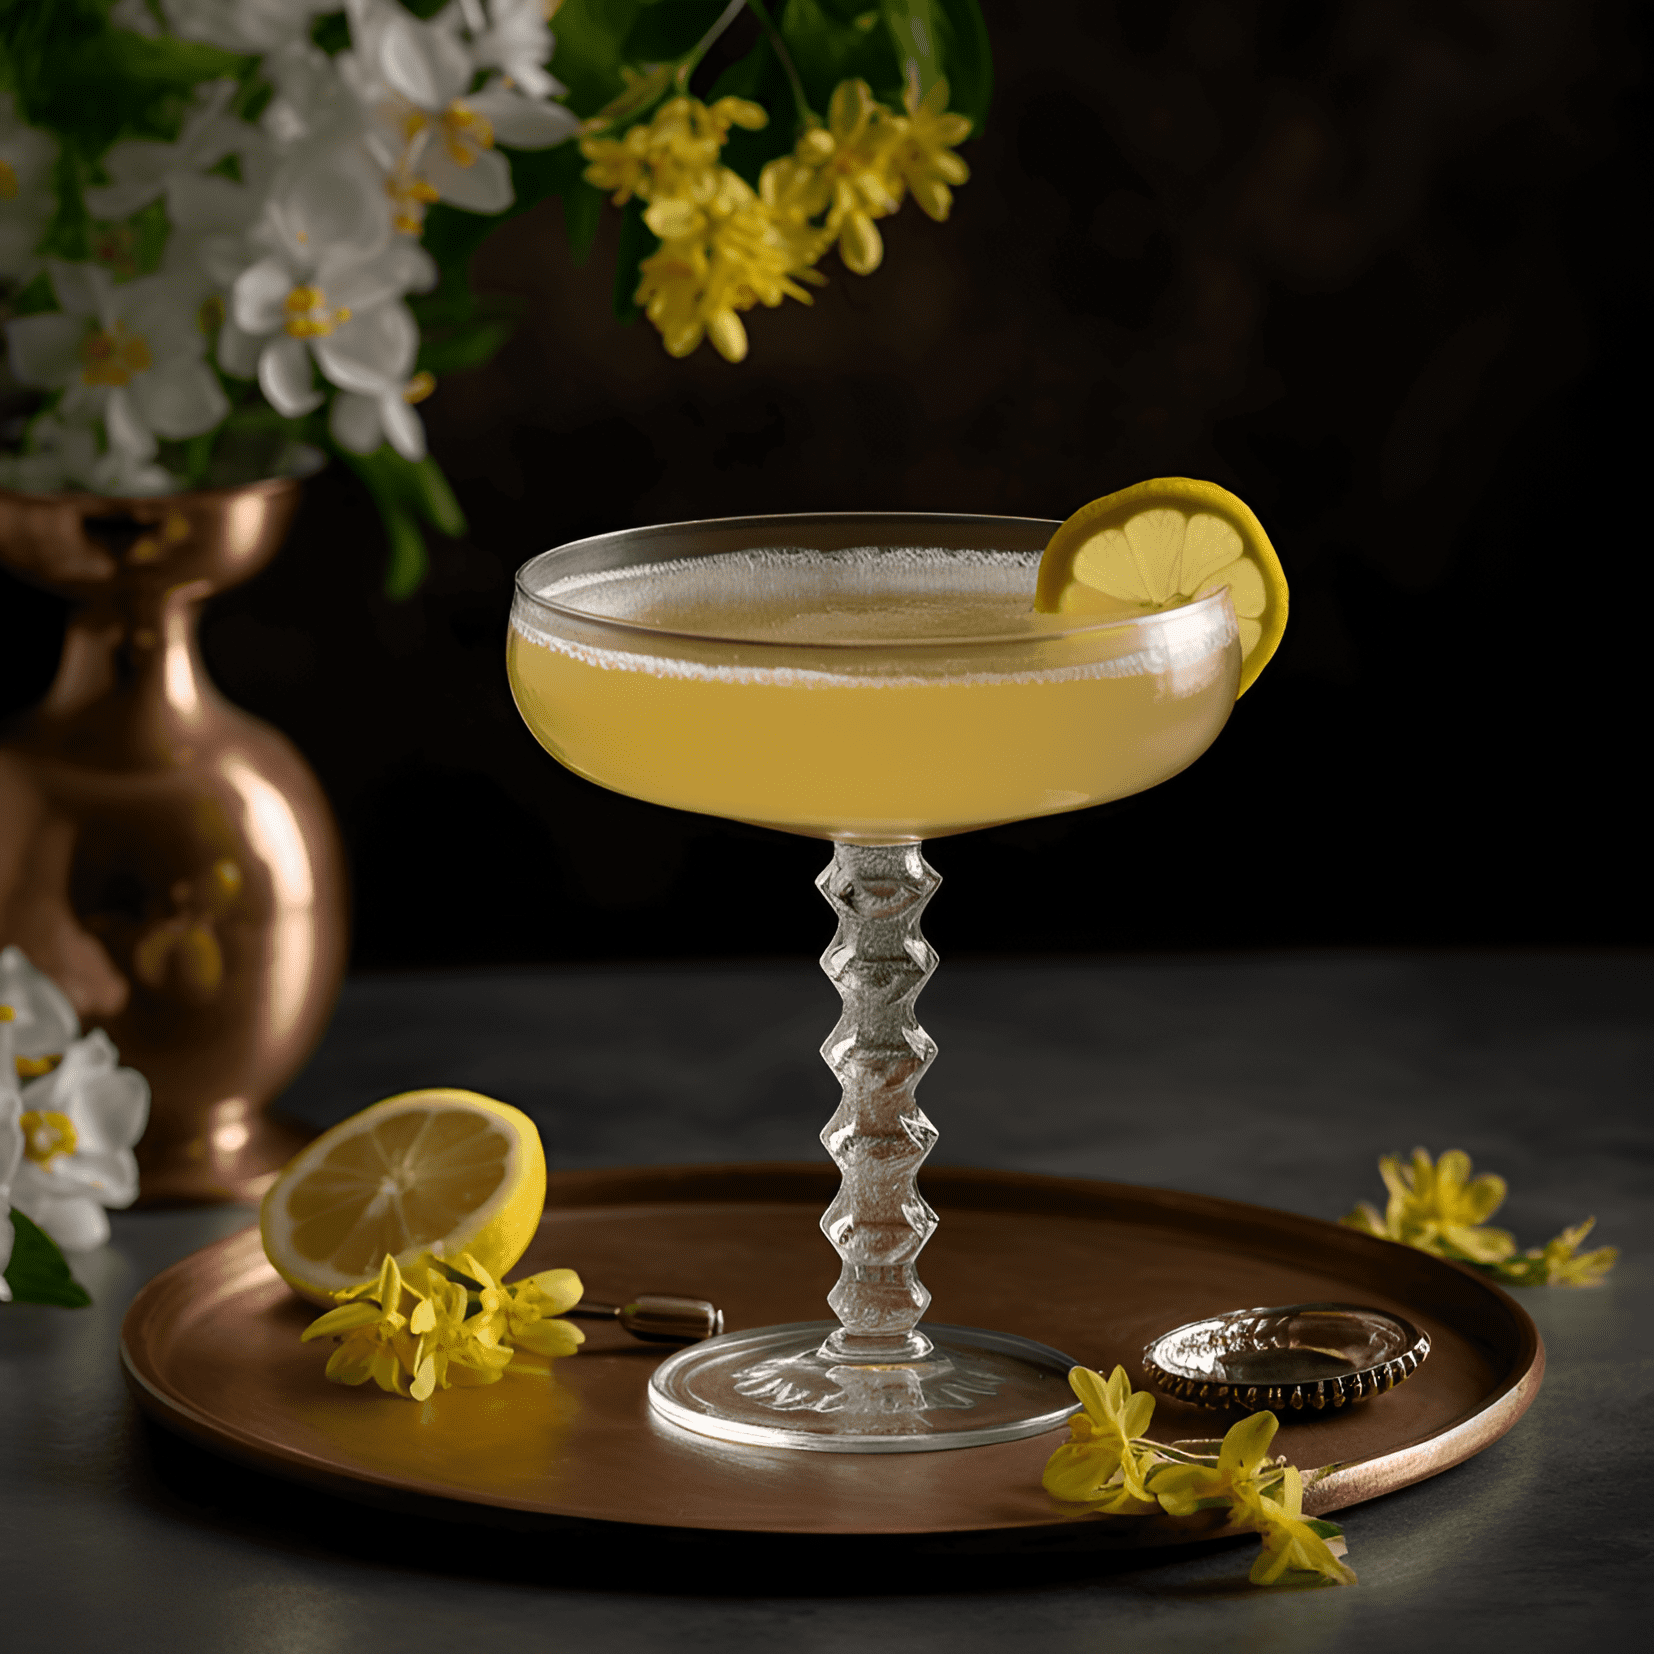 Bee's Knees Cocktail Recipe - The Bee's Knees cocktail is a delightful balance of sweet, sour, and floral flavors. The honey syrup adds a rich sweetness, while the lemon juice provides a tangy, refreshing sourness. The gin's botanicals shine through, giving the drink a complex and satisfying taste.